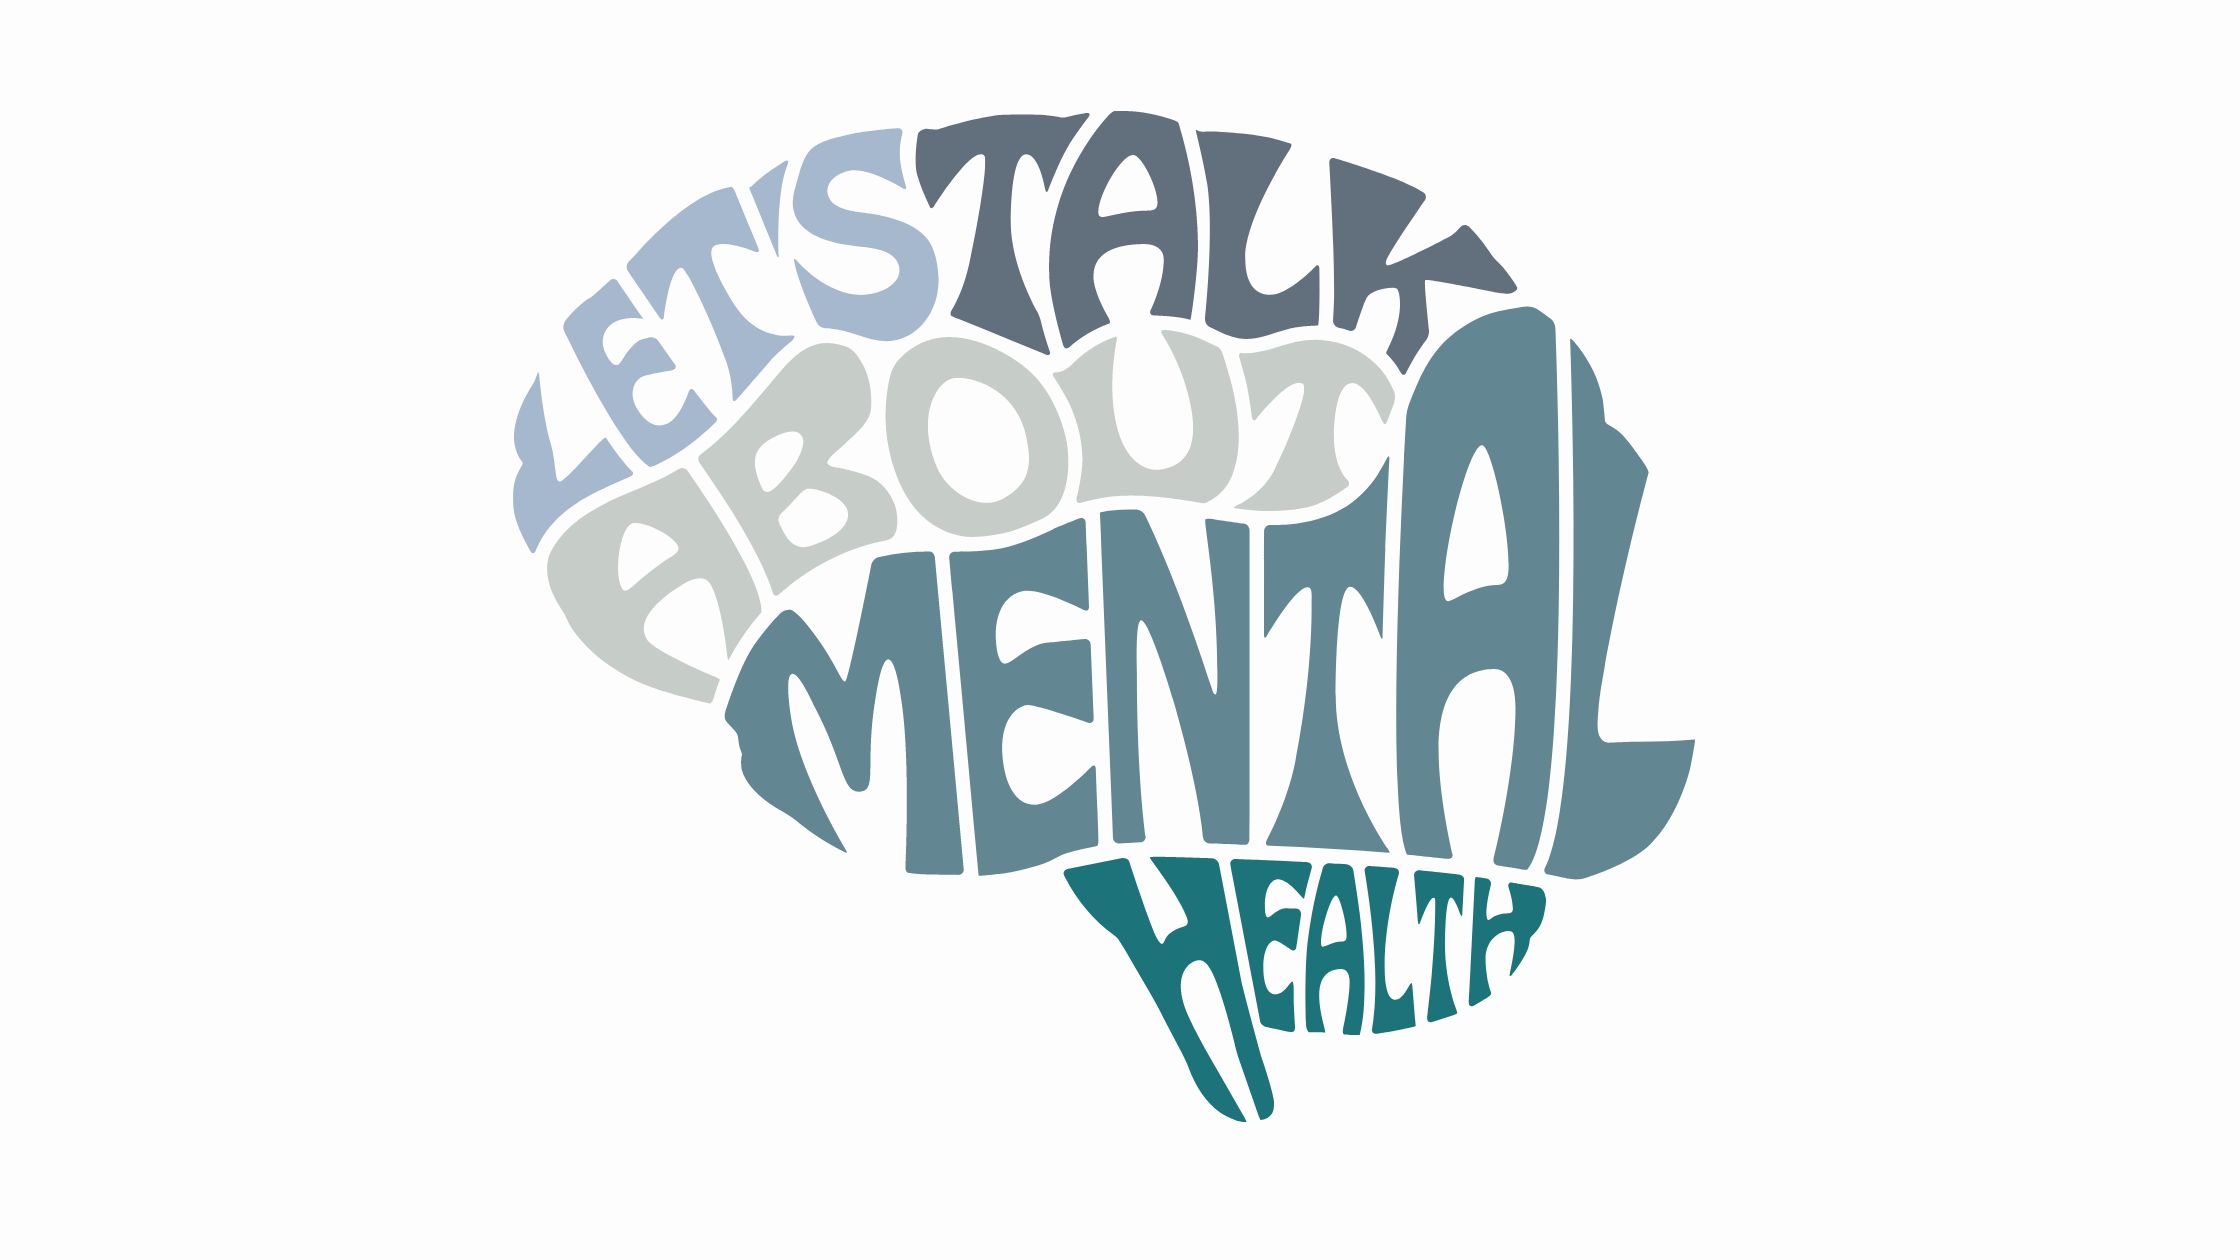 A stylized word cloud that says "Let's Talk About Mental Health"